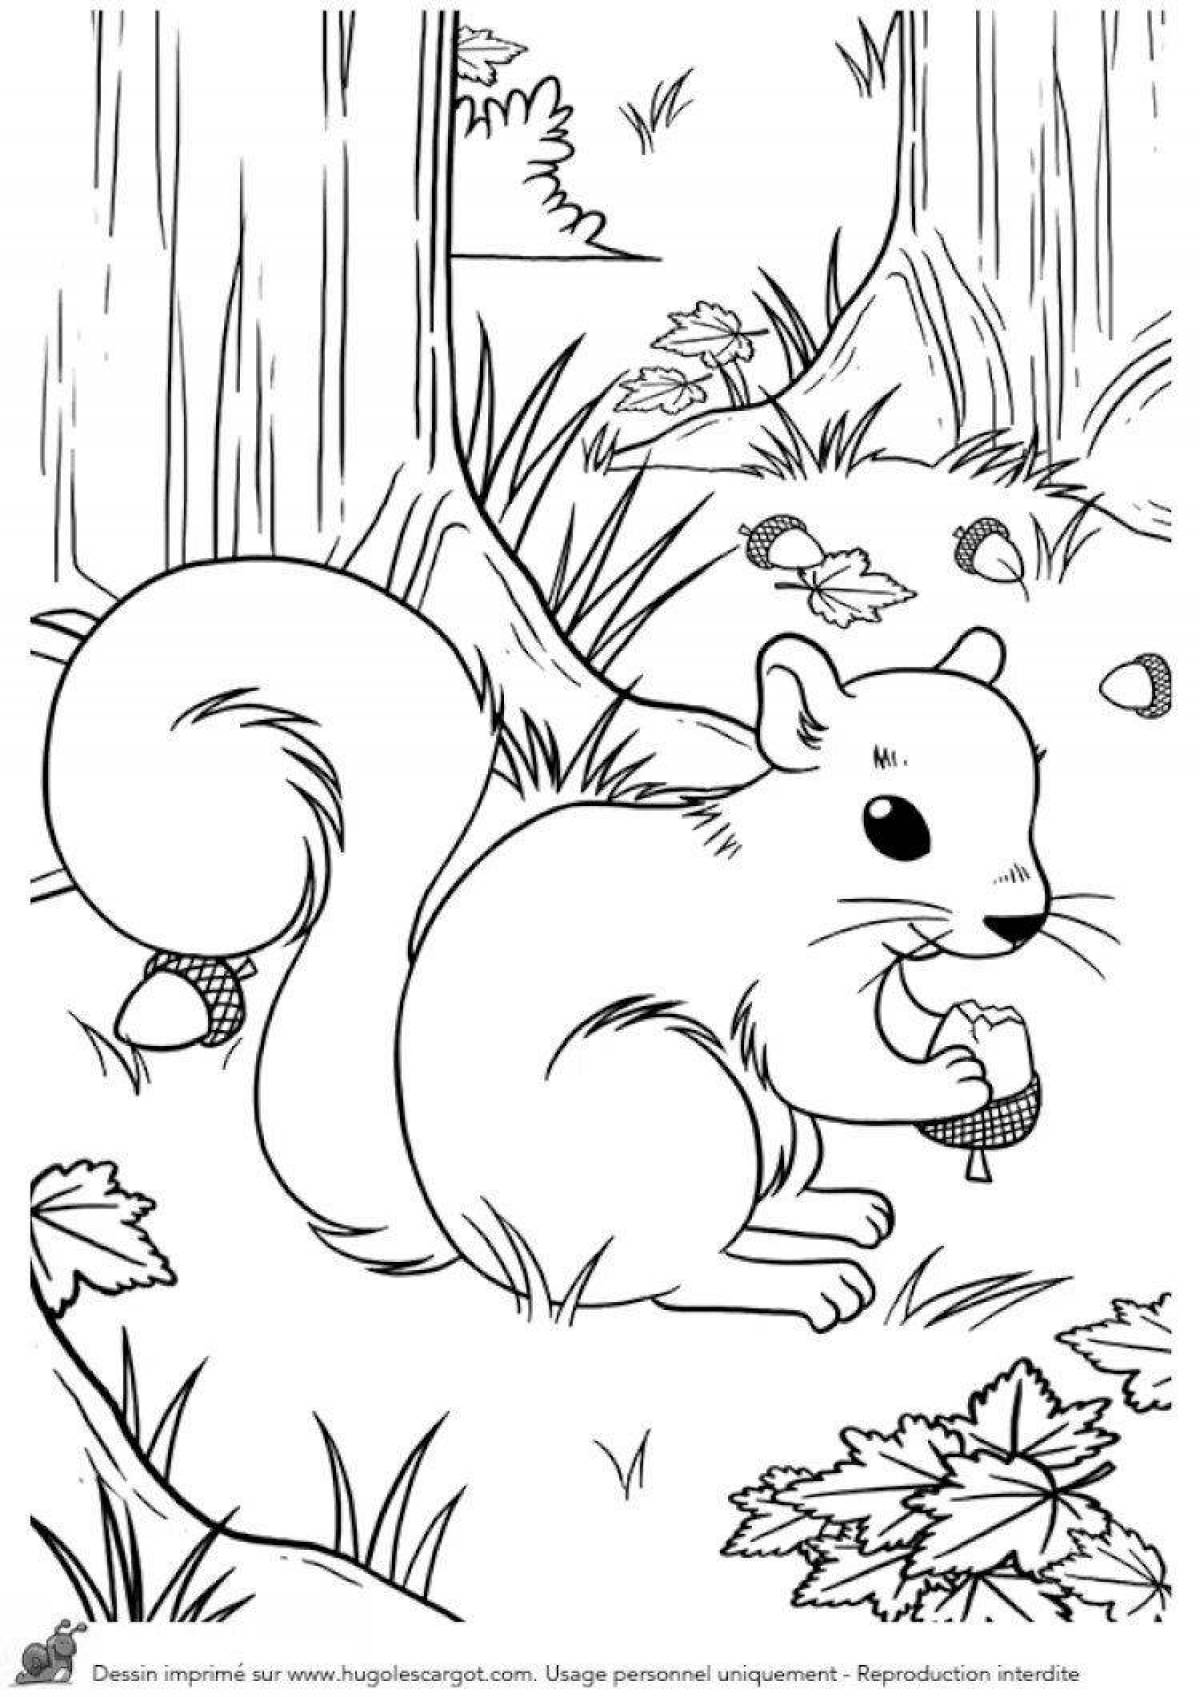 Daring squirrel in the forest